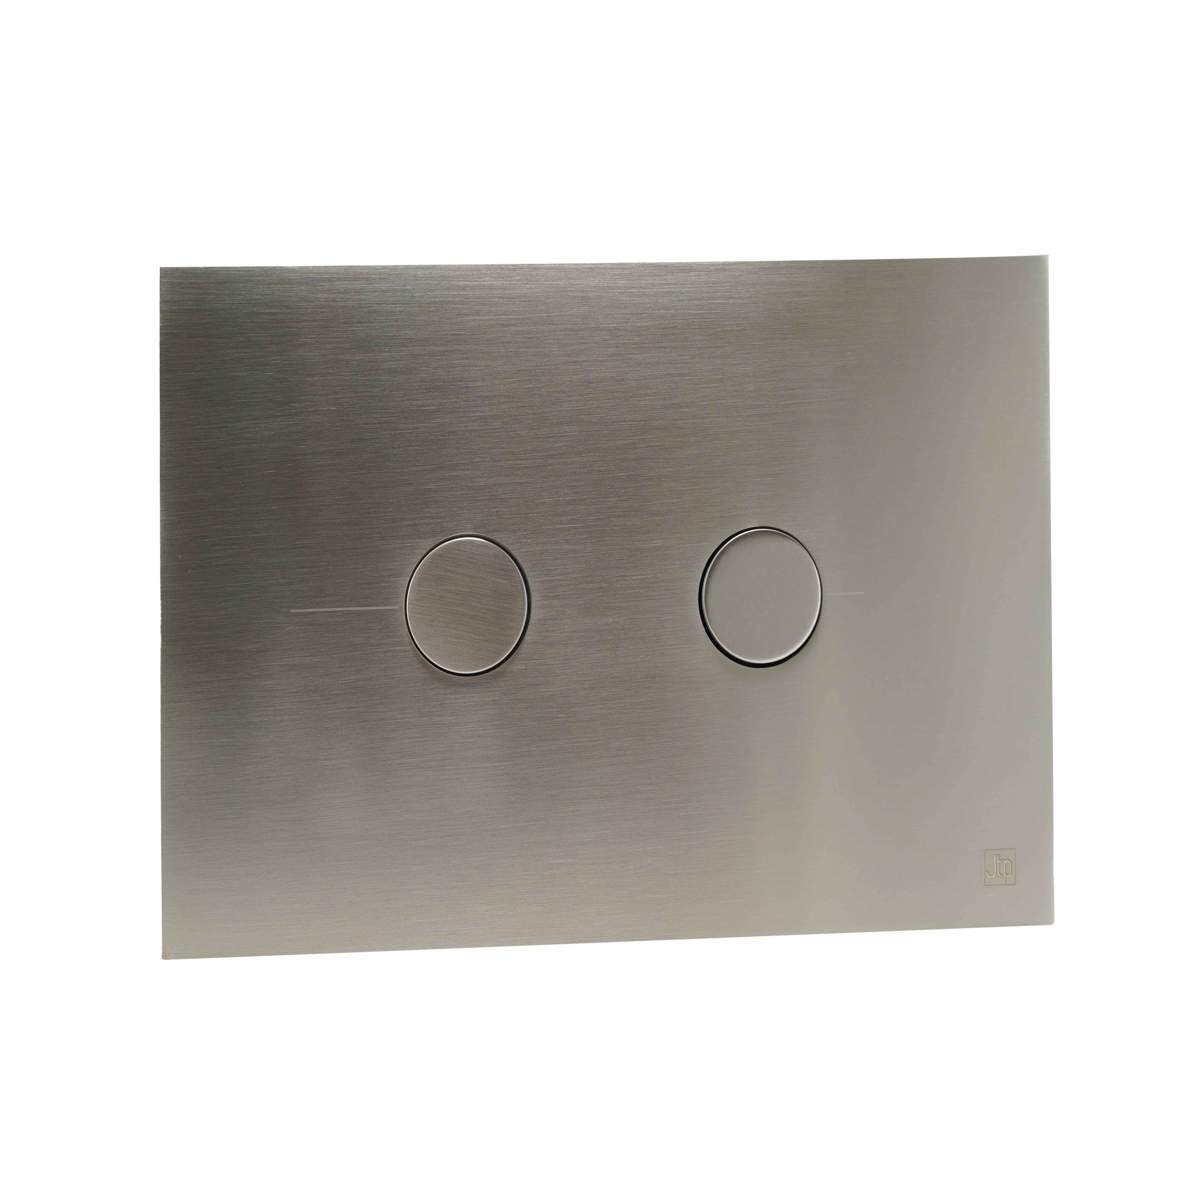 JTP Inox Stainless Steel Metal Pneumatic Flush Plate with WC Frame (FPINOX)